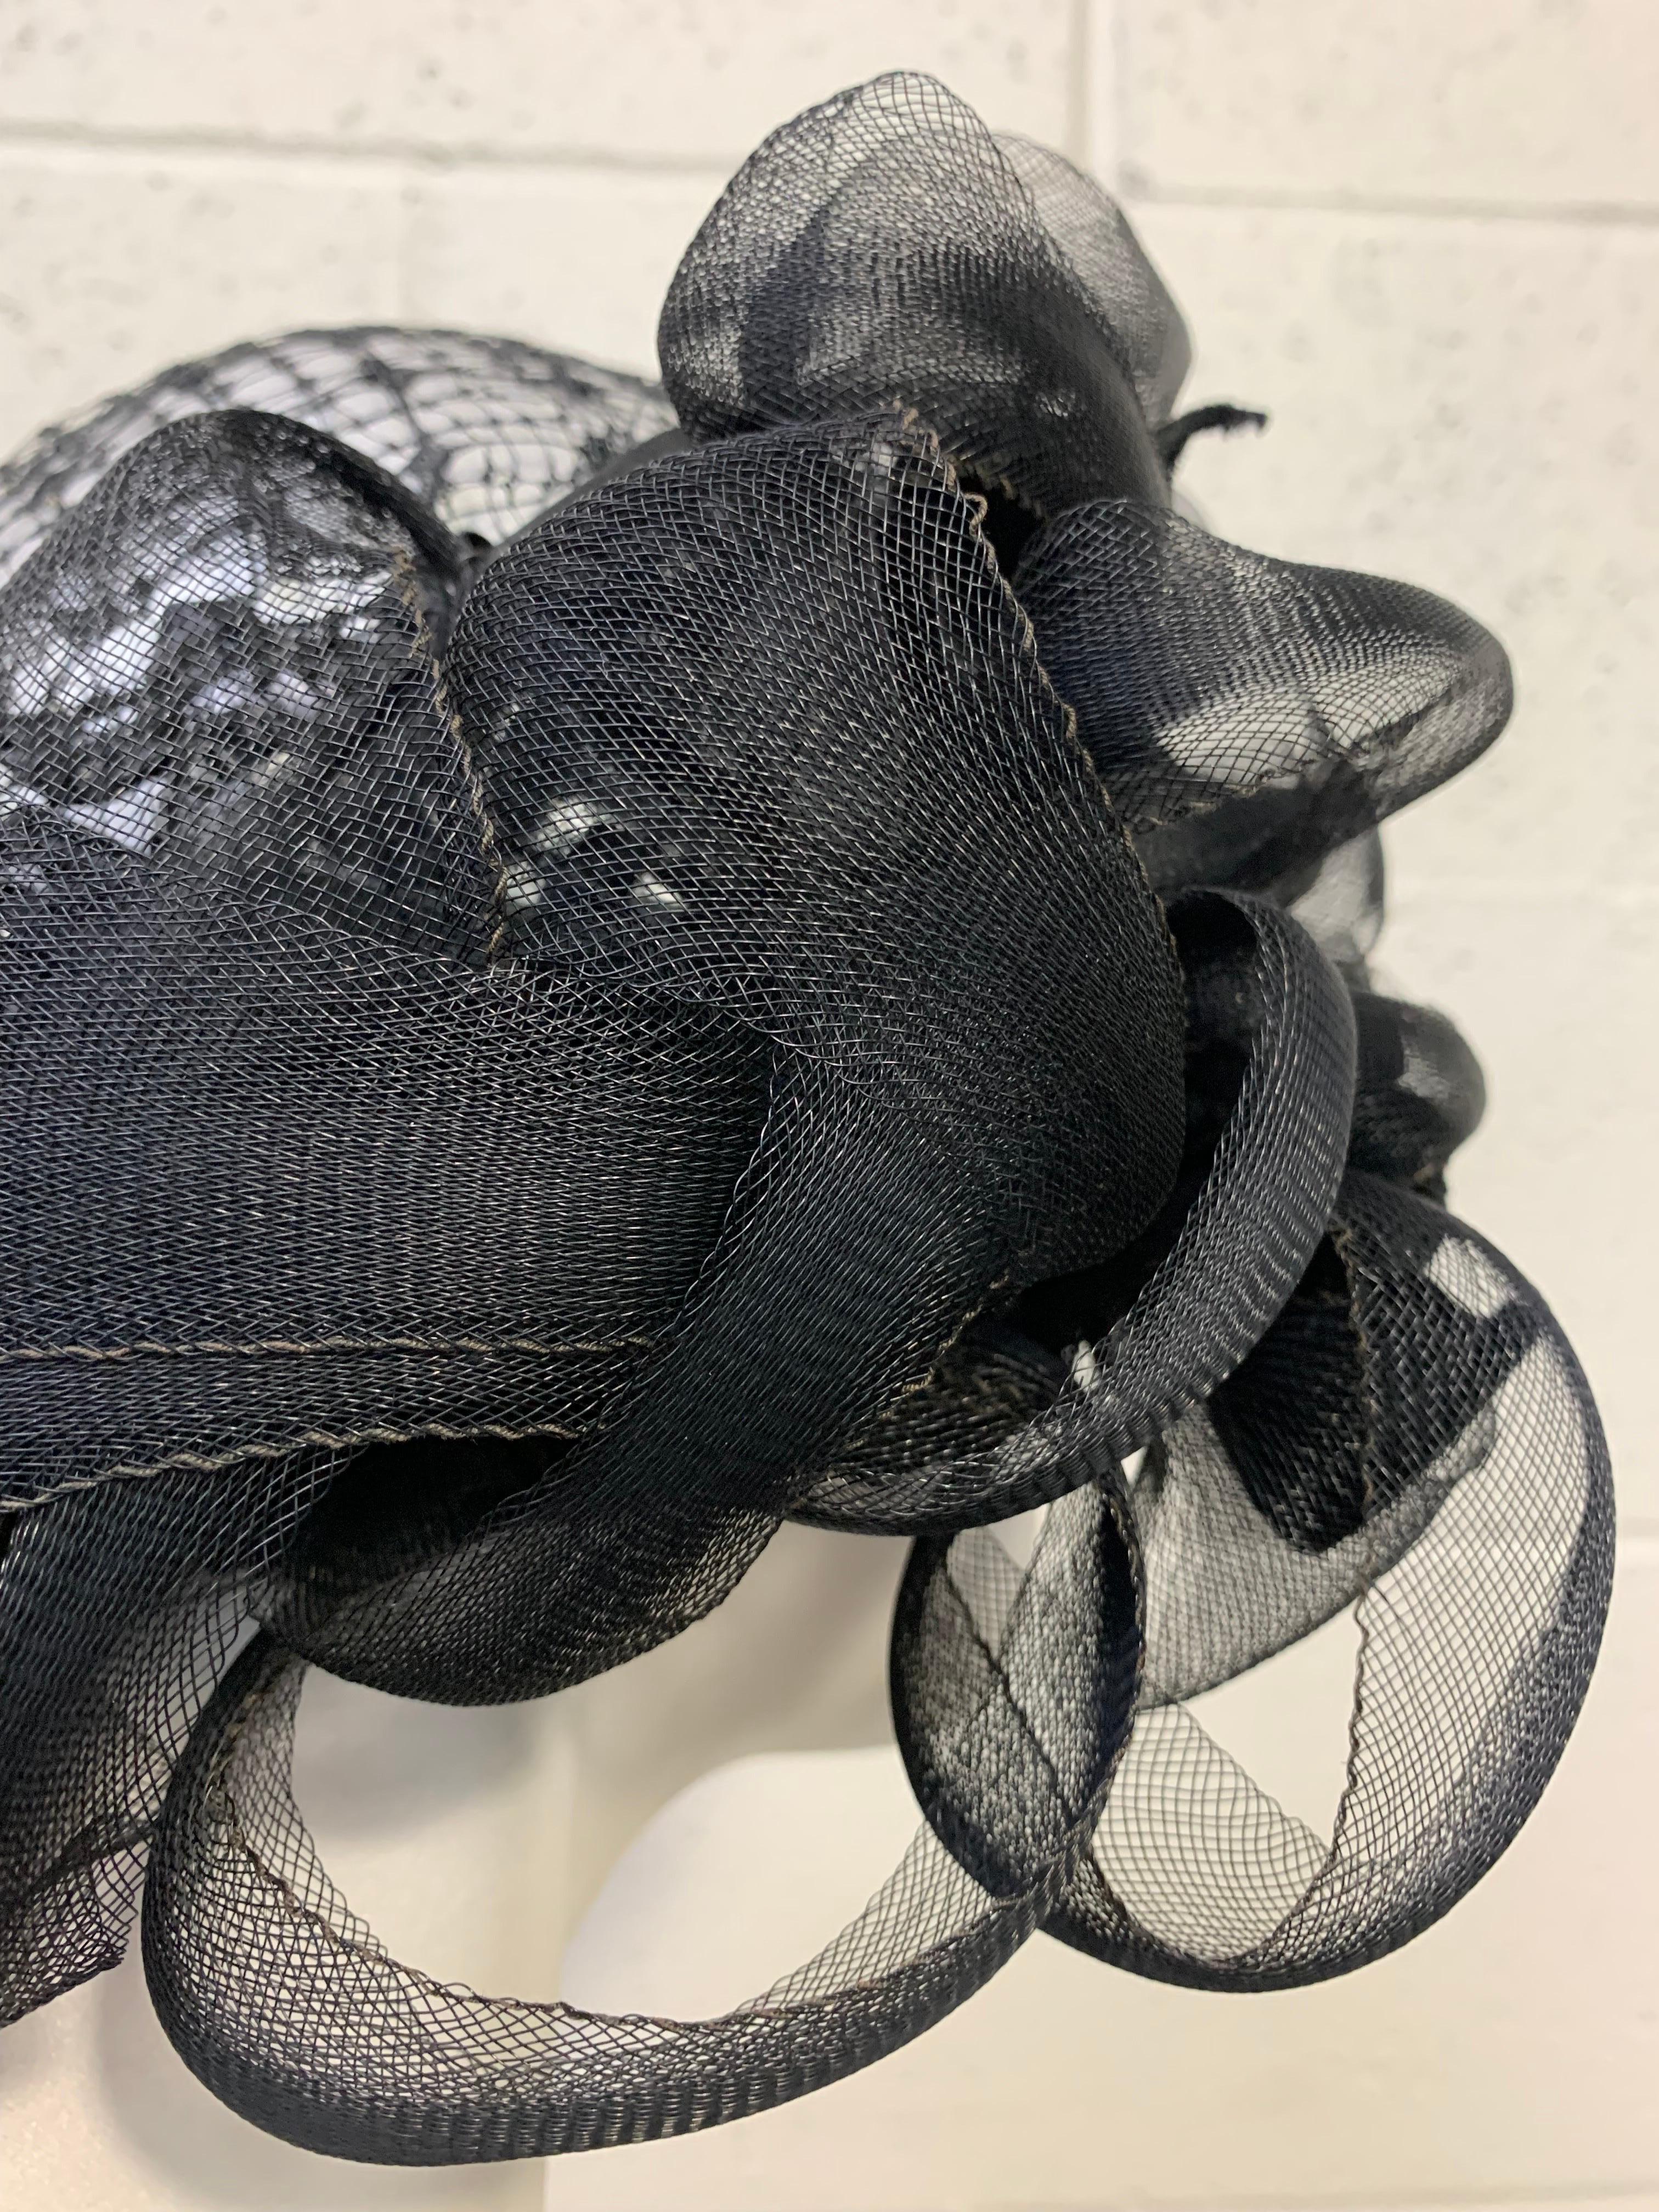  1960s Christian Dior Black Horsehair & Net Dramatic Looped Cocktail Hat  4